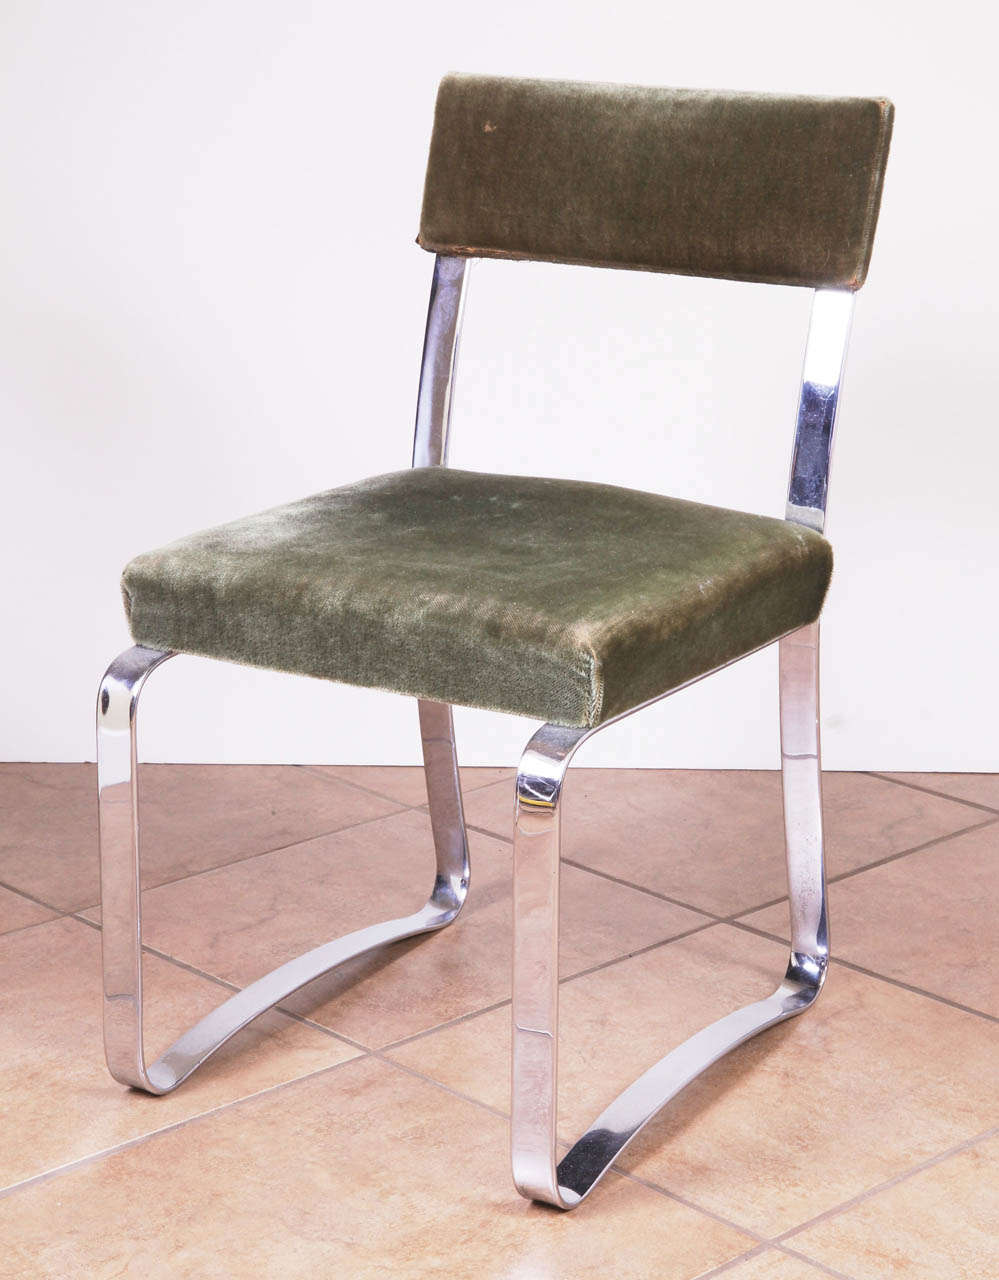 Super wide, thickly chromed flat-band chair by McKay.
Original sage-green mohair in vintage used condition.

Classic McKay convex leg stretchers, canted-back and large screw caps.

Really great substantial version, surpassing quality of Hoffman